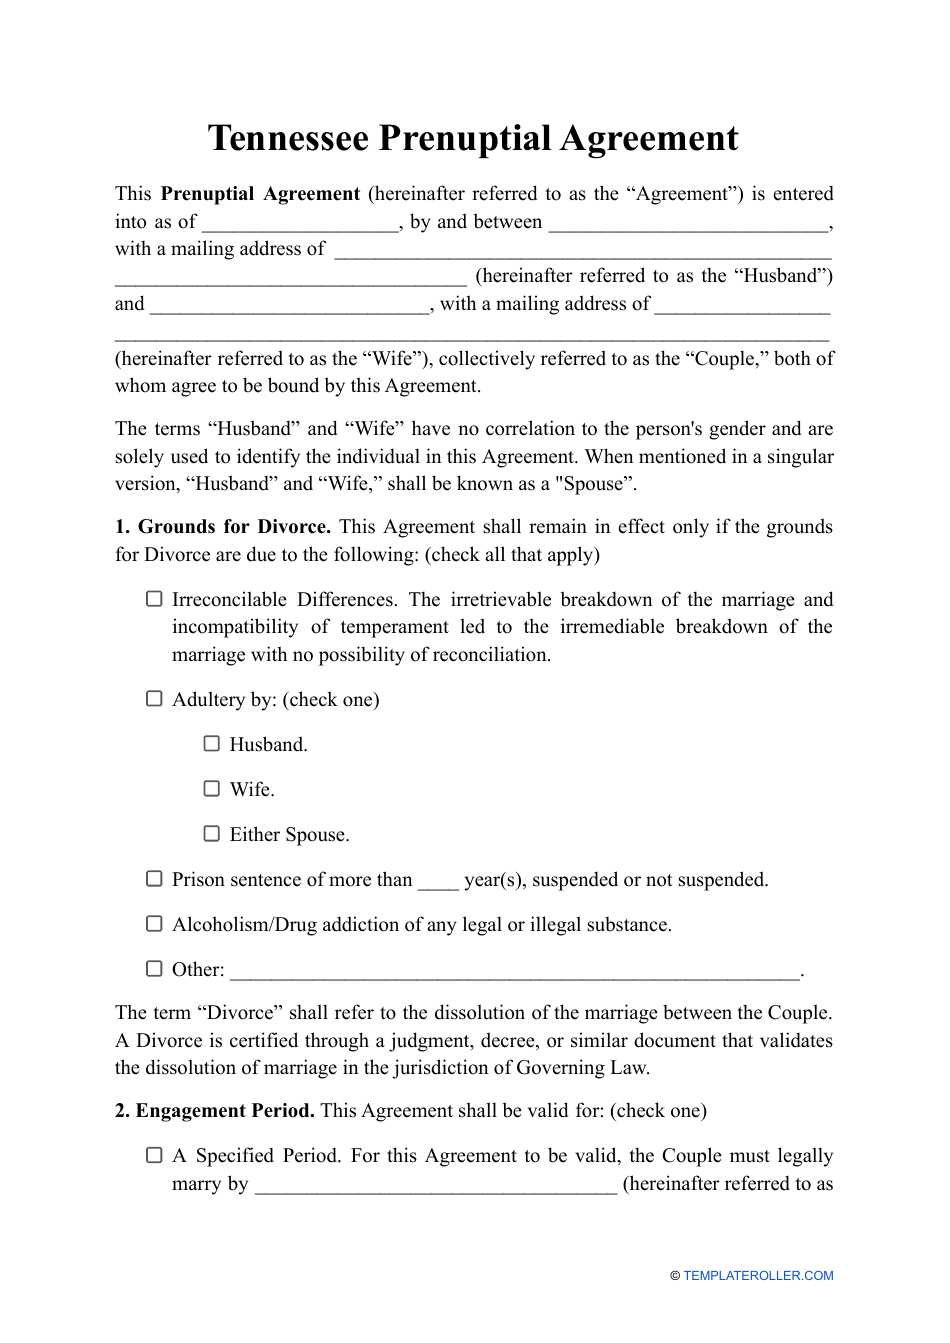 Prenuptial Agreement Template - Tennessee, Page 1